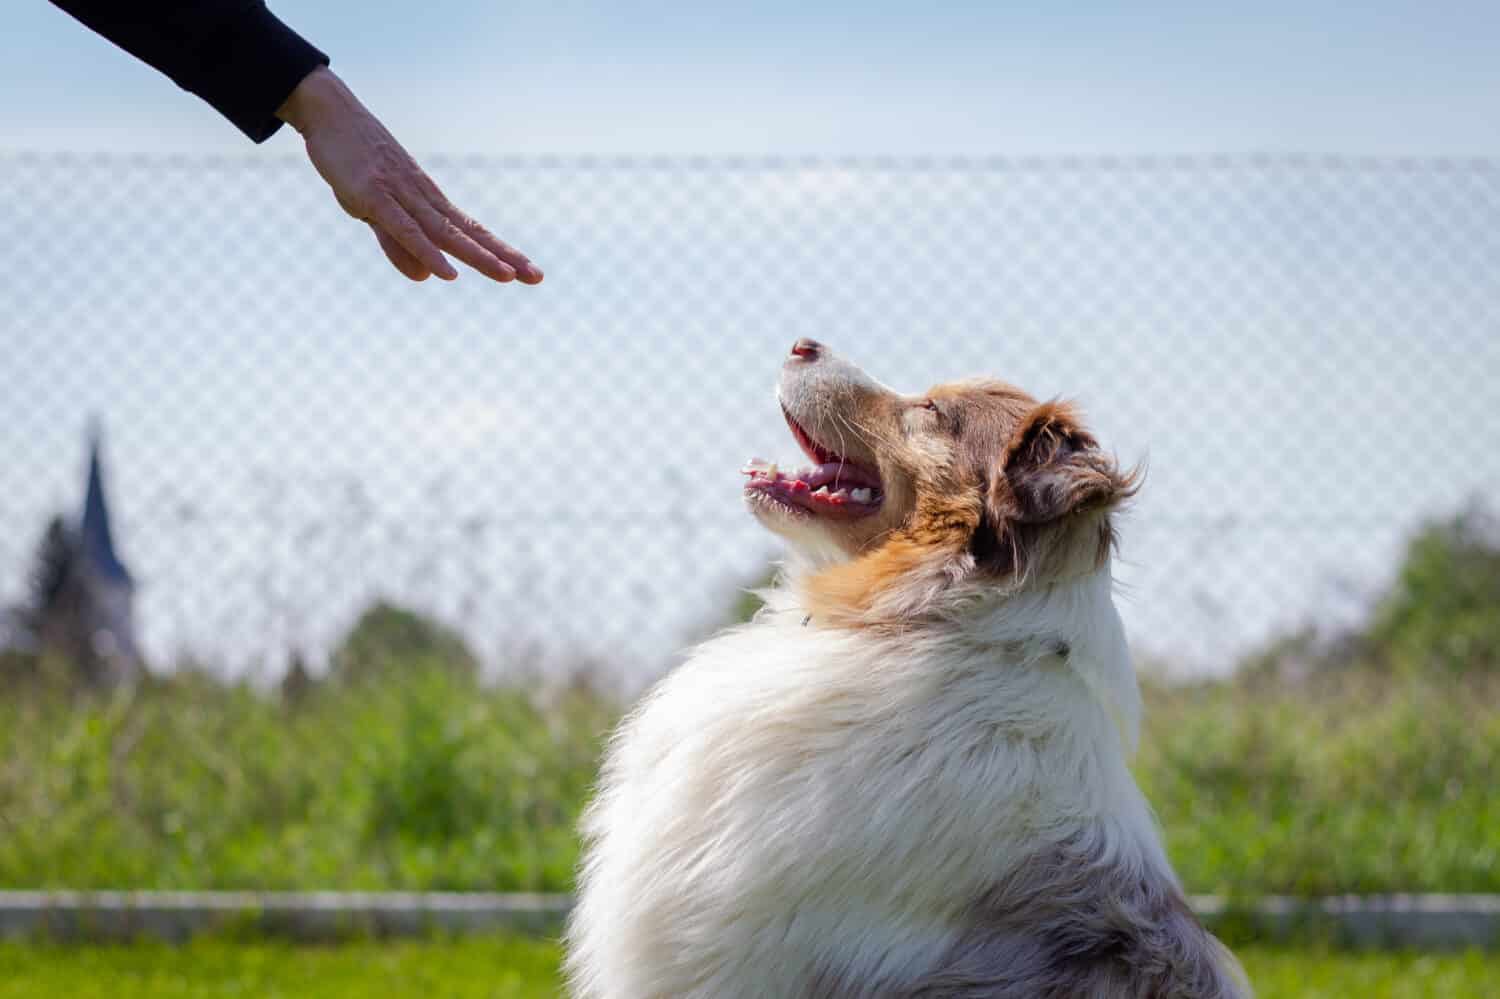 Training Australian Shepherd. Woman gesture  command stay by hand to her dog. Training animal obedience